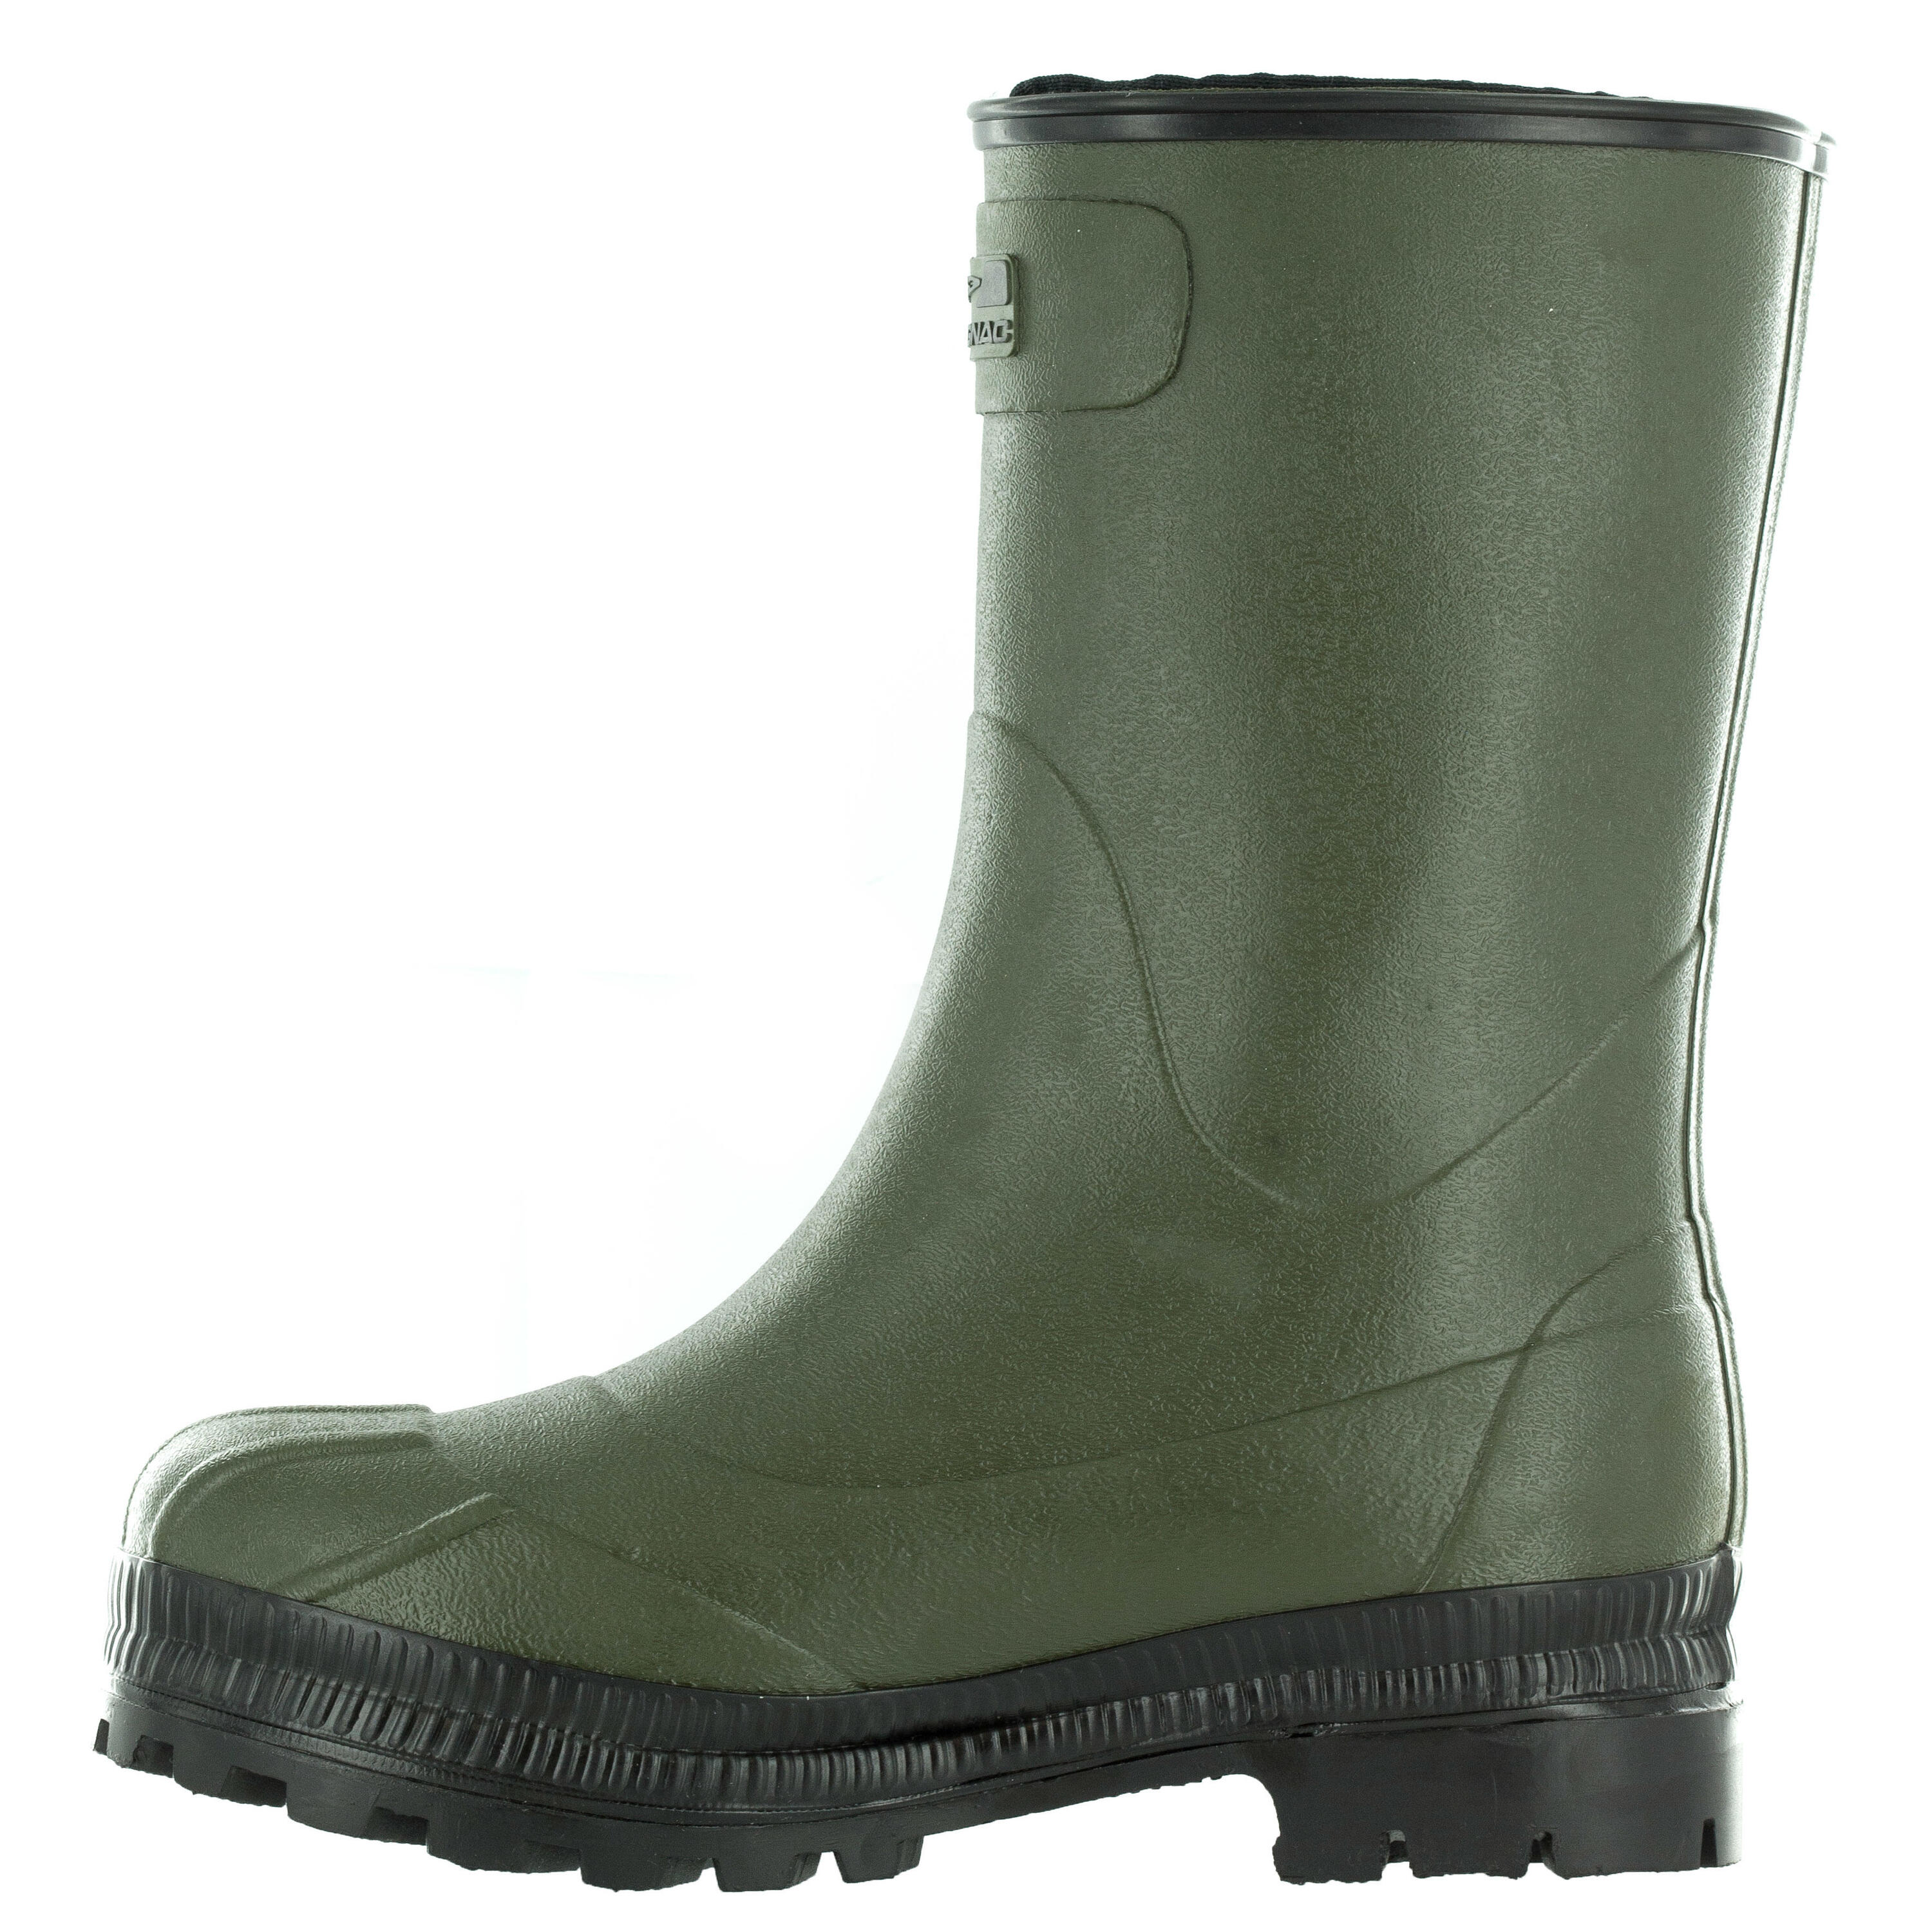 Toundra 500 short wellies with removable liner - Green 2/8